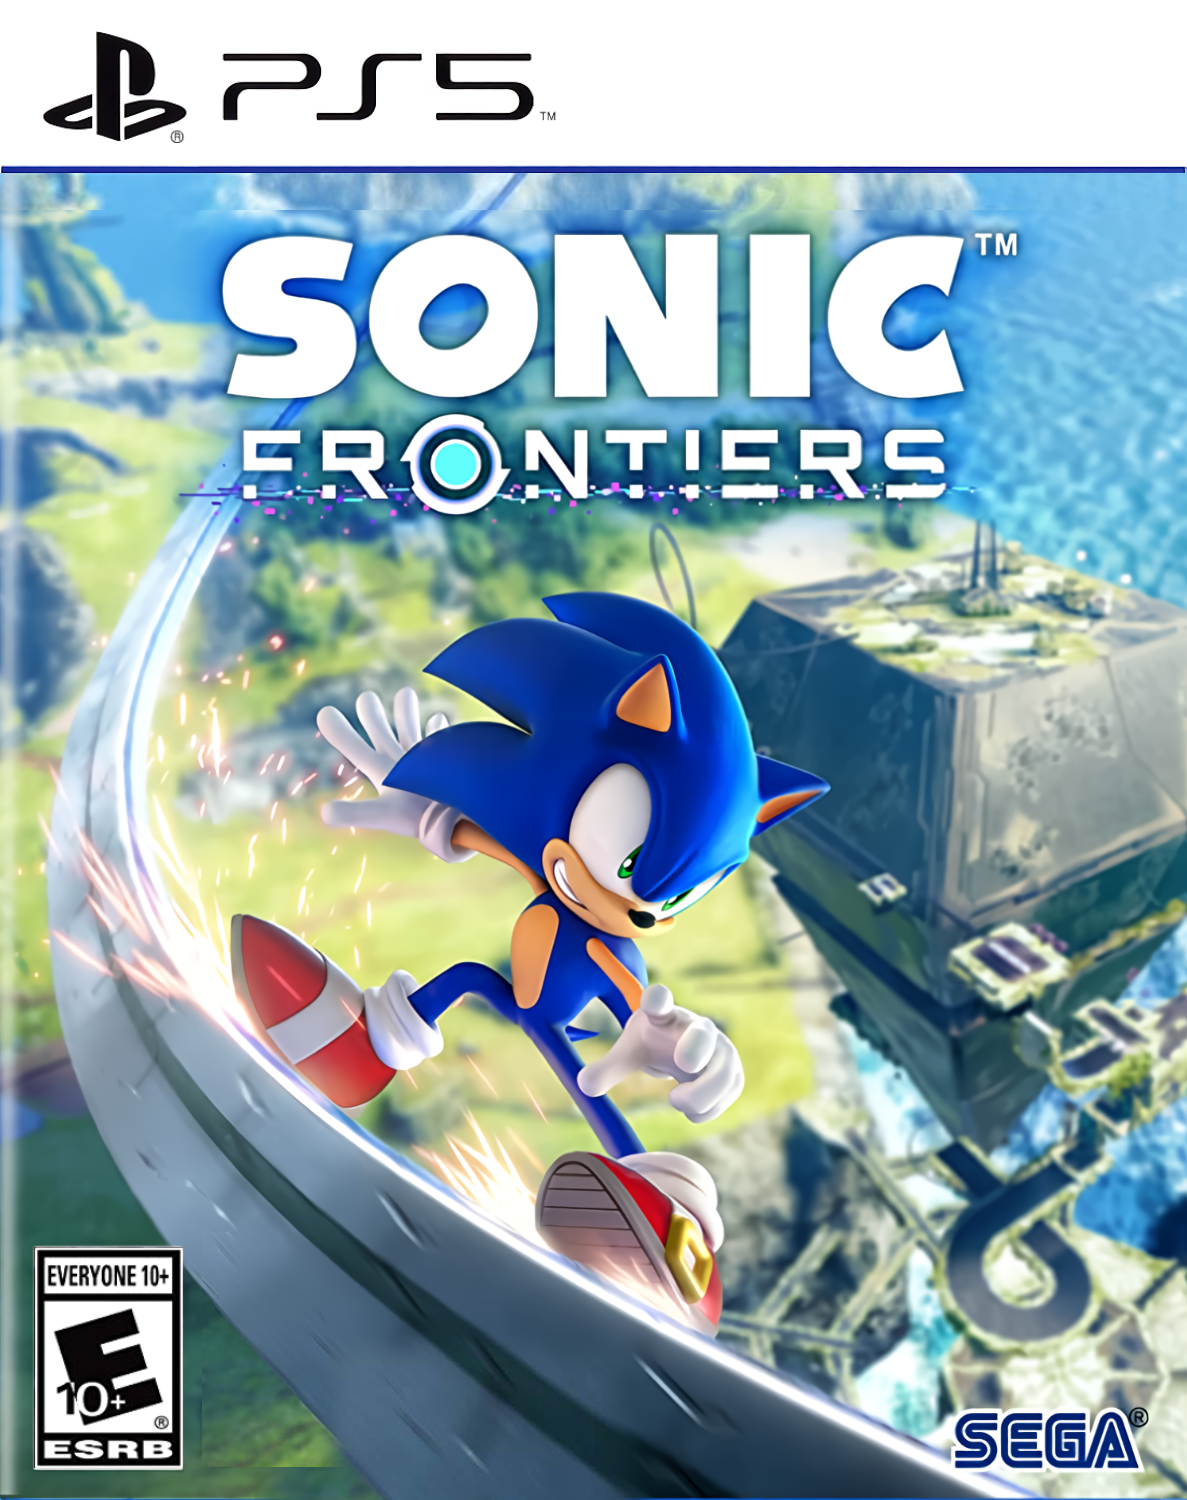 Sonic Frontiers PlayStation 5 (2022) by SonicLoud1213 on DeviantArt